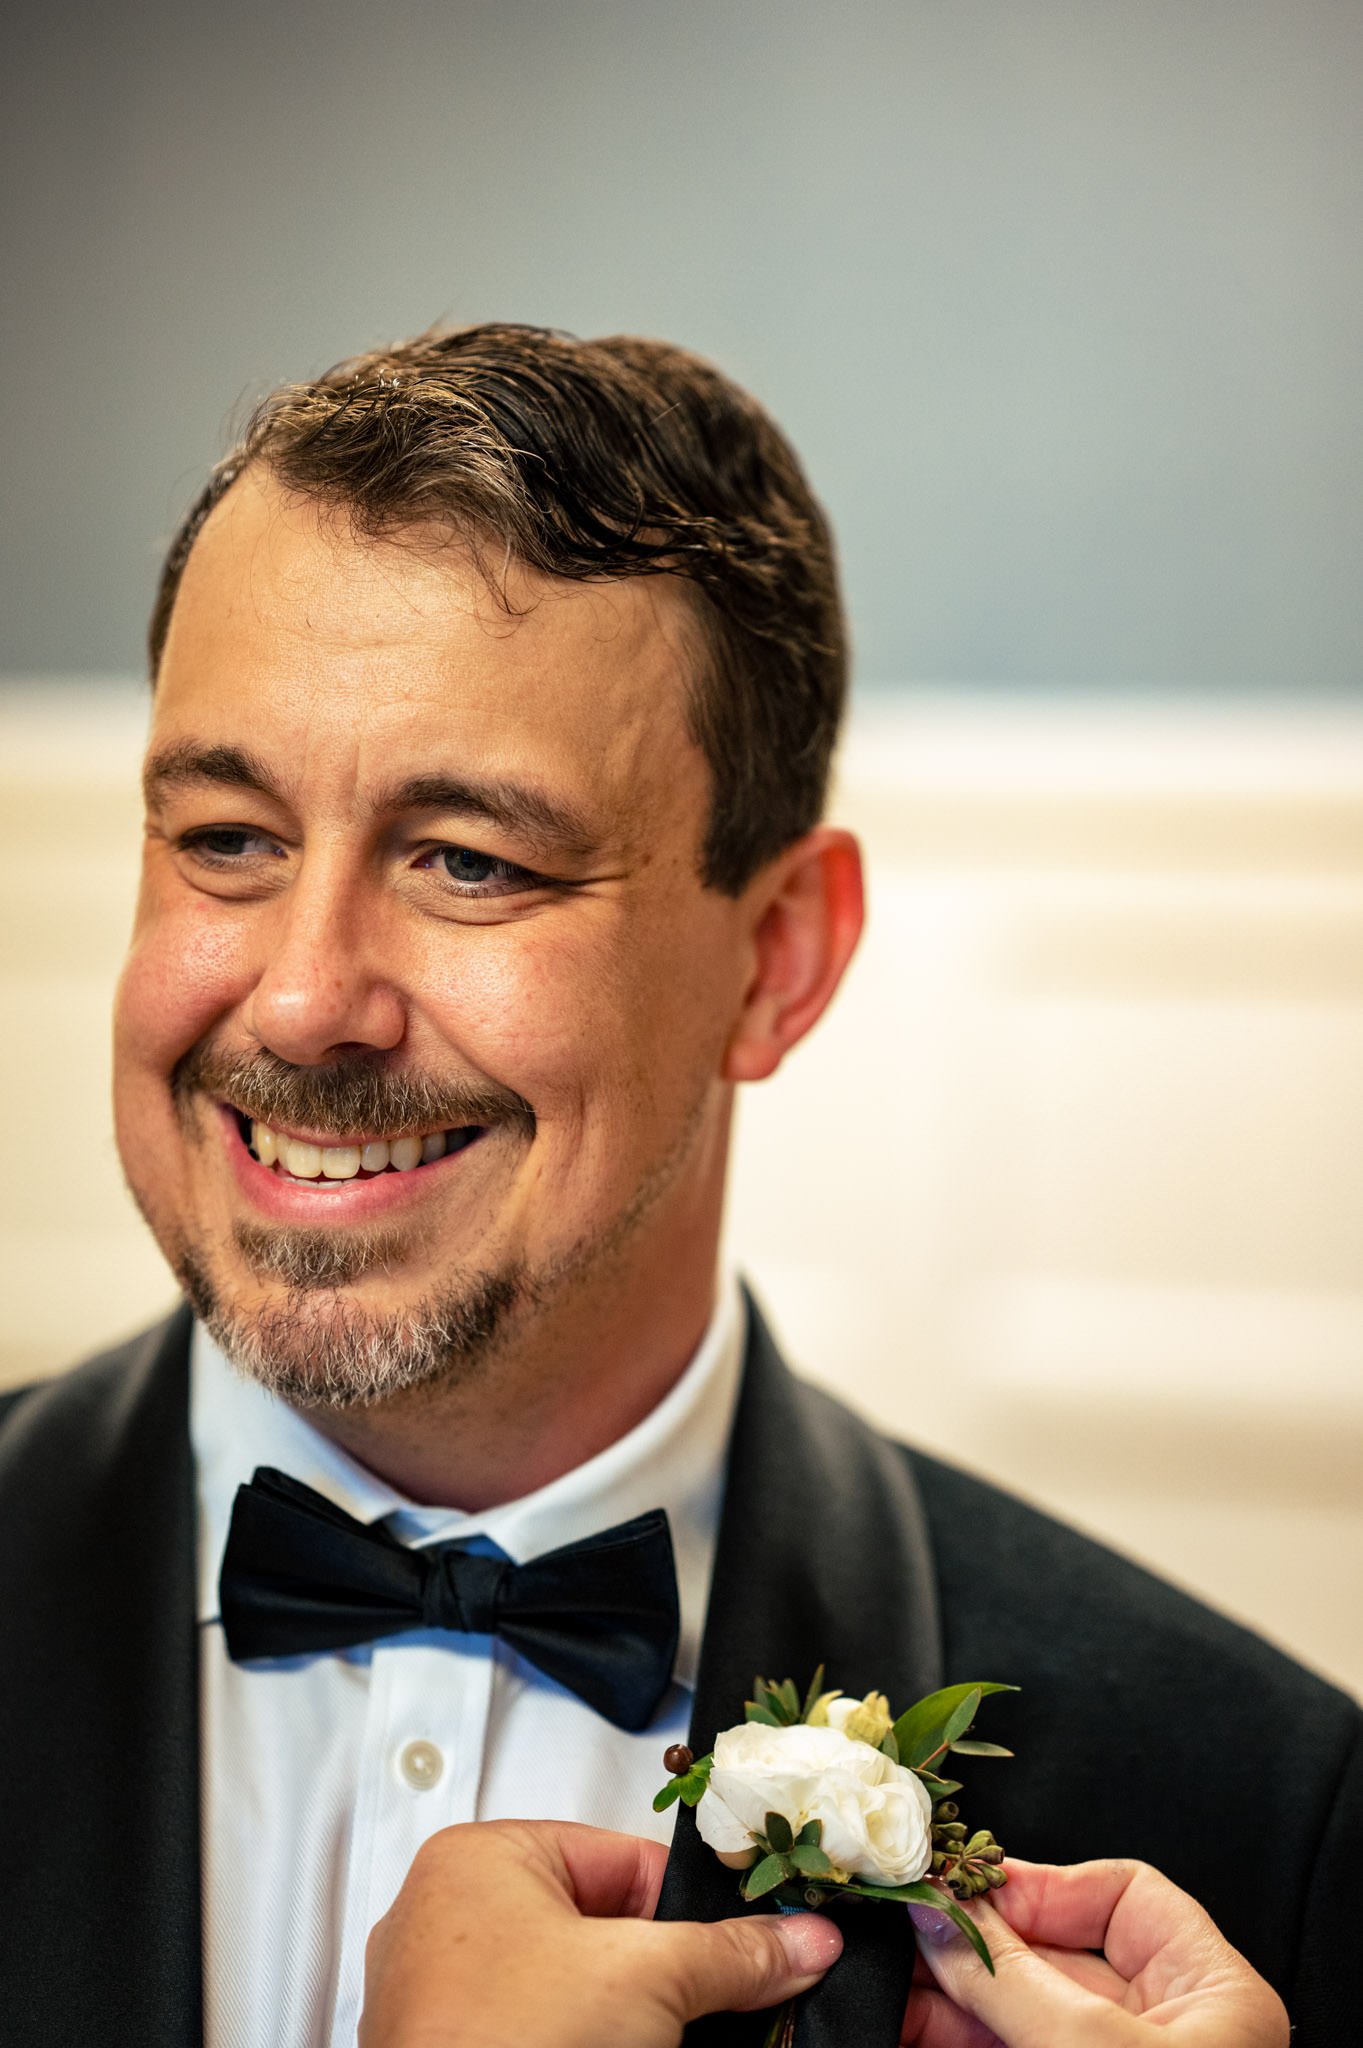 A smiling man in a tuxedo with a bow tie, adjusting a boutonniere on his lapel at a Homewood wedding in Asheville, NC.